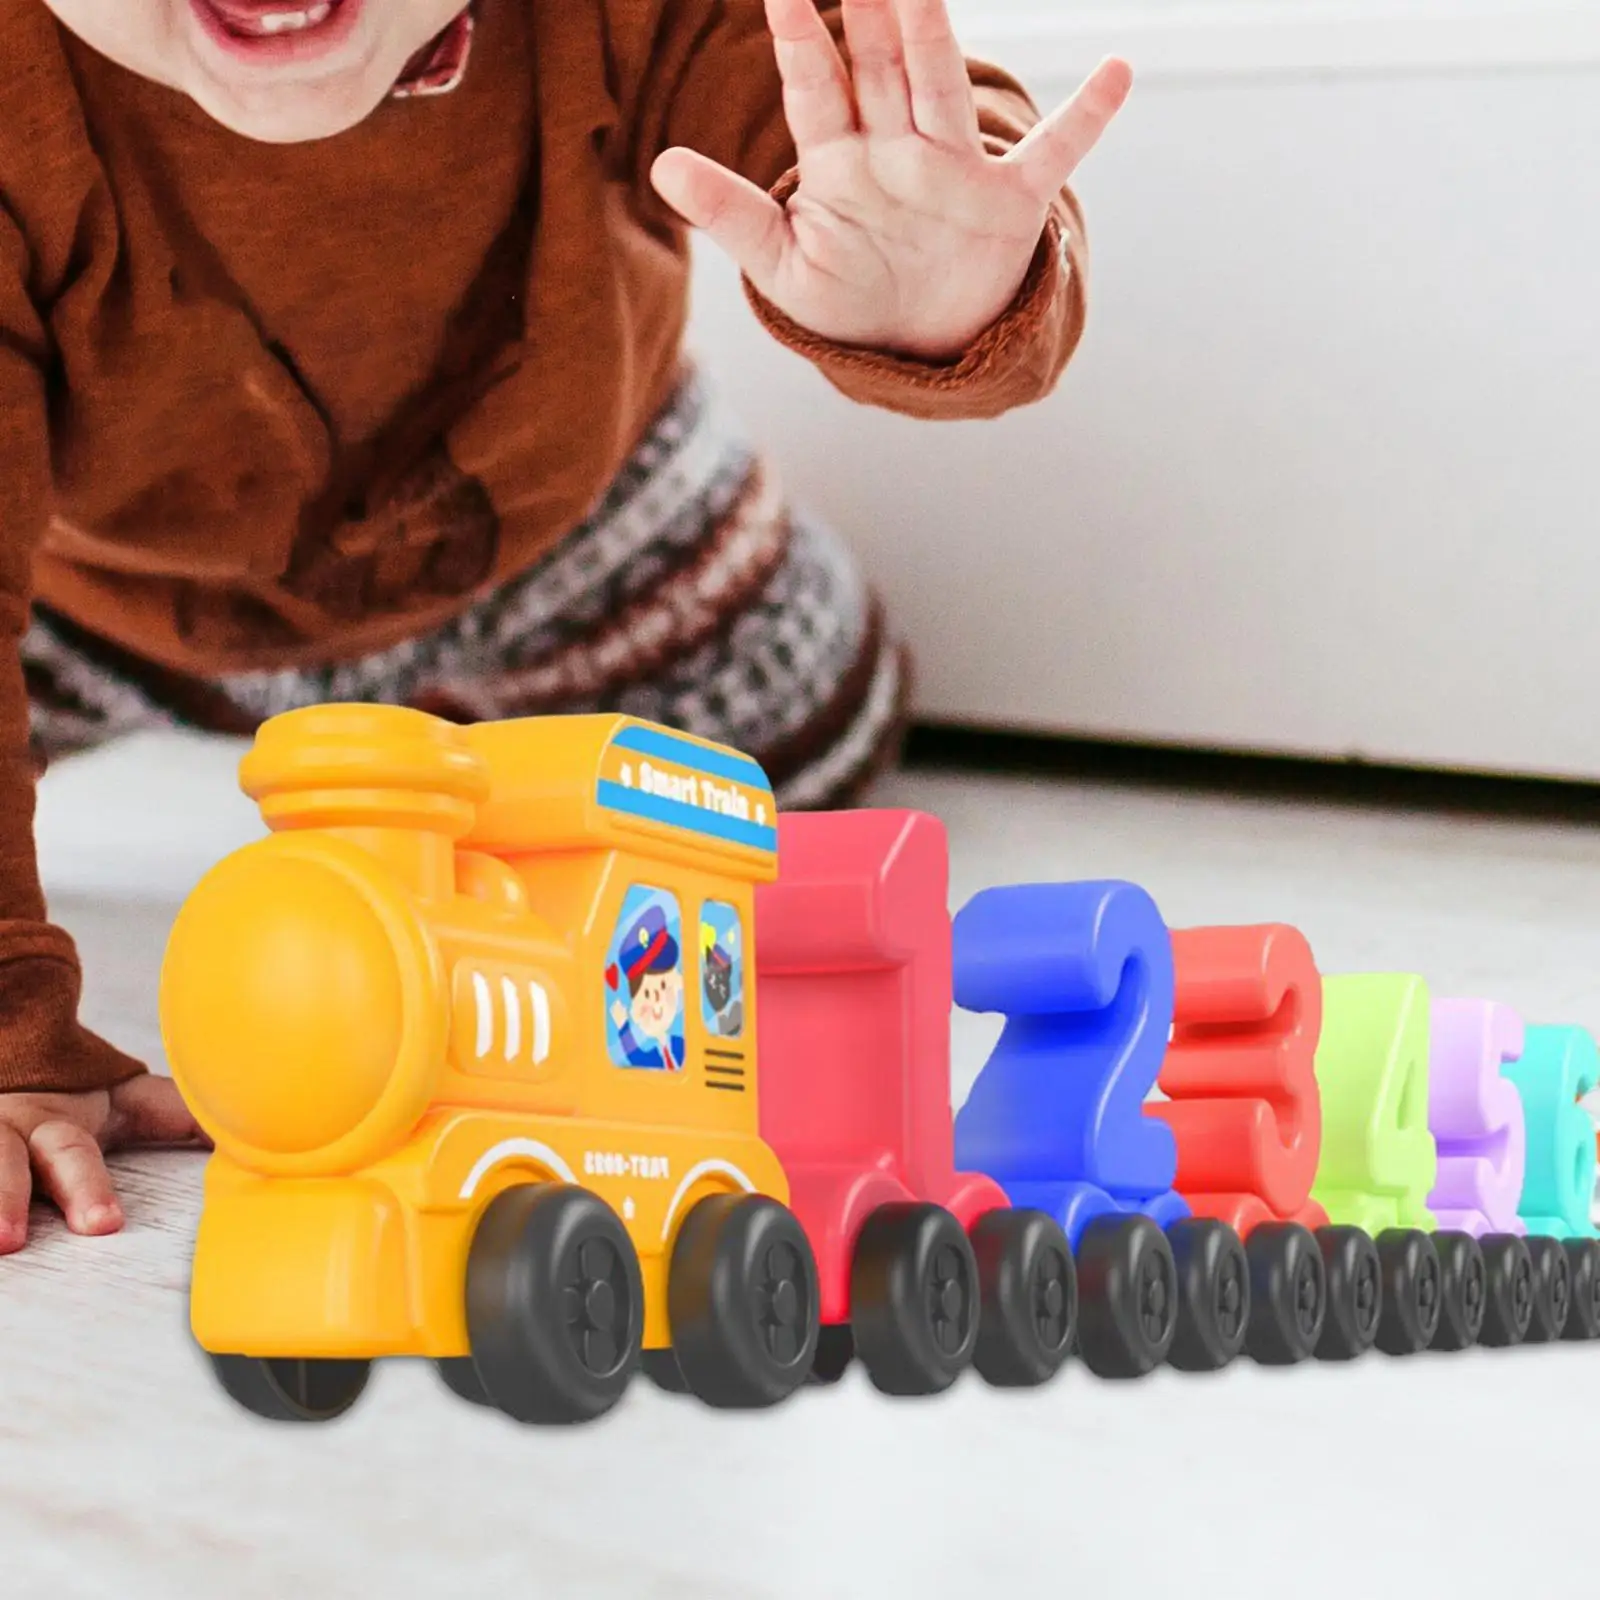 11 Piece Wooden Number Train Set Developmental Toy Preschool Learning Activities Colorful Play Set Wooden Train Set for Indoor